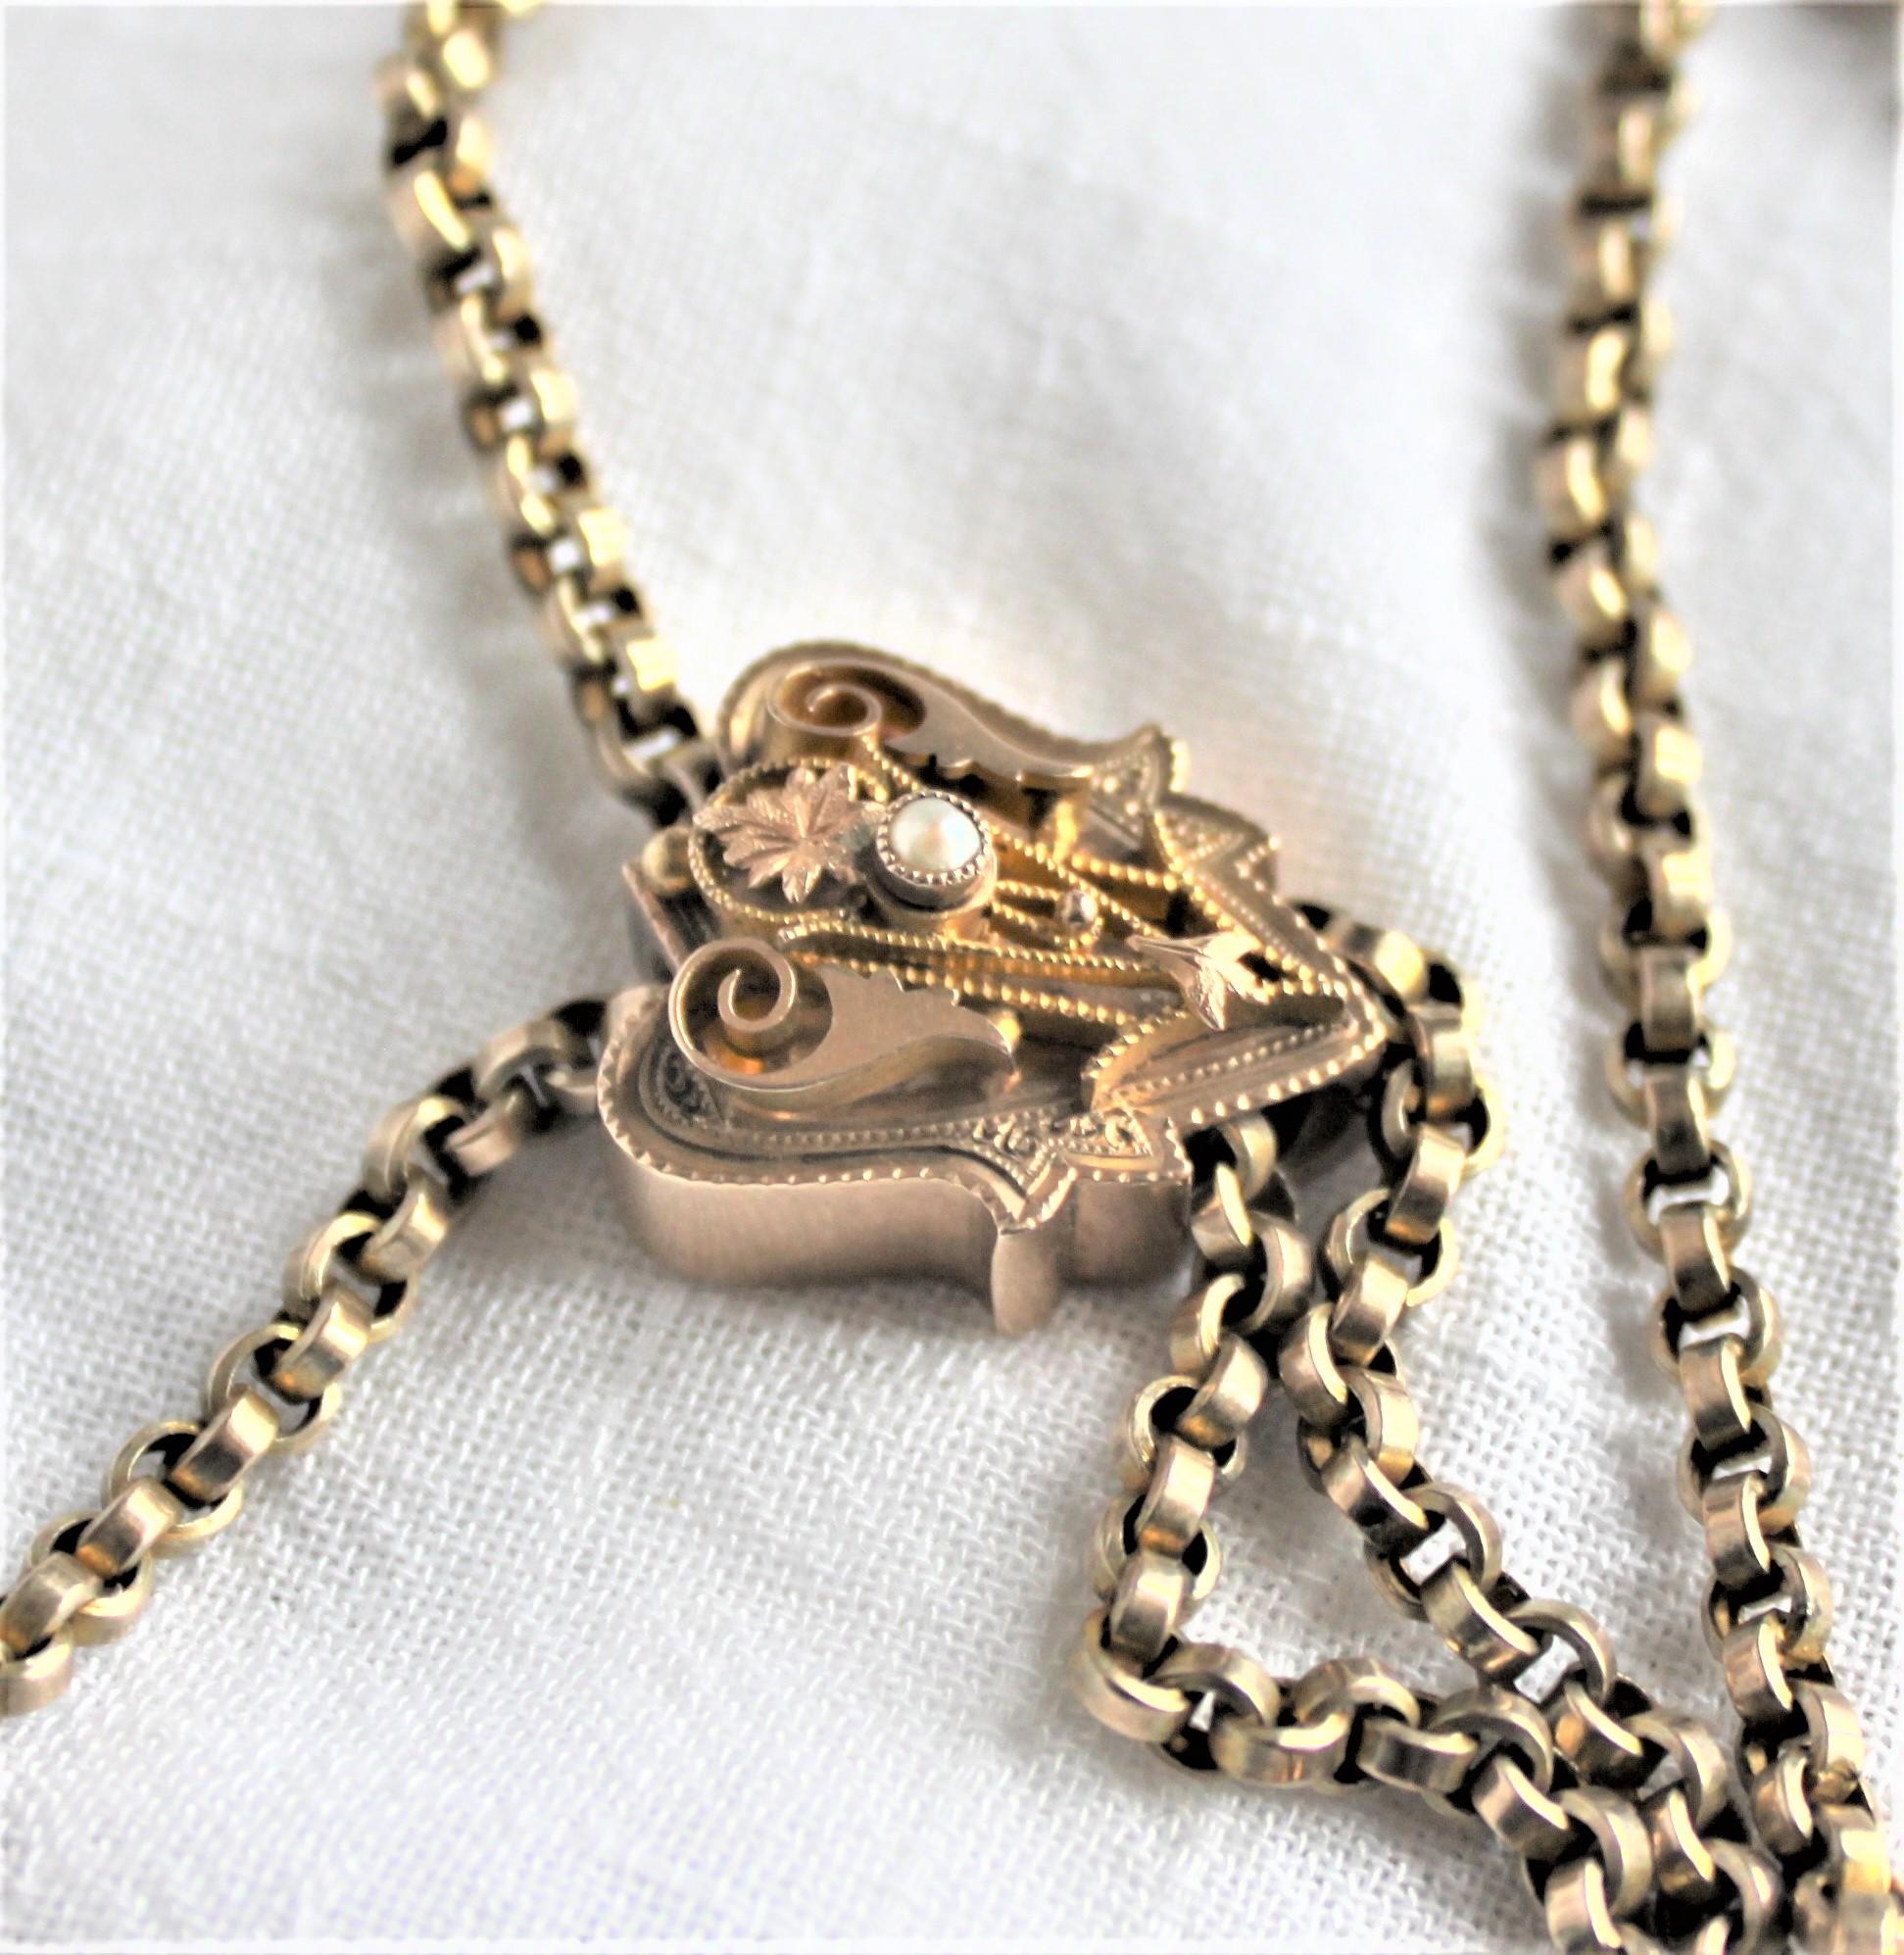 Antique Edwardian 9-Karat Yellow Gold Slide Watch Chain Necklace & Key In Good Condition For Sale In Hamilton, Ontario